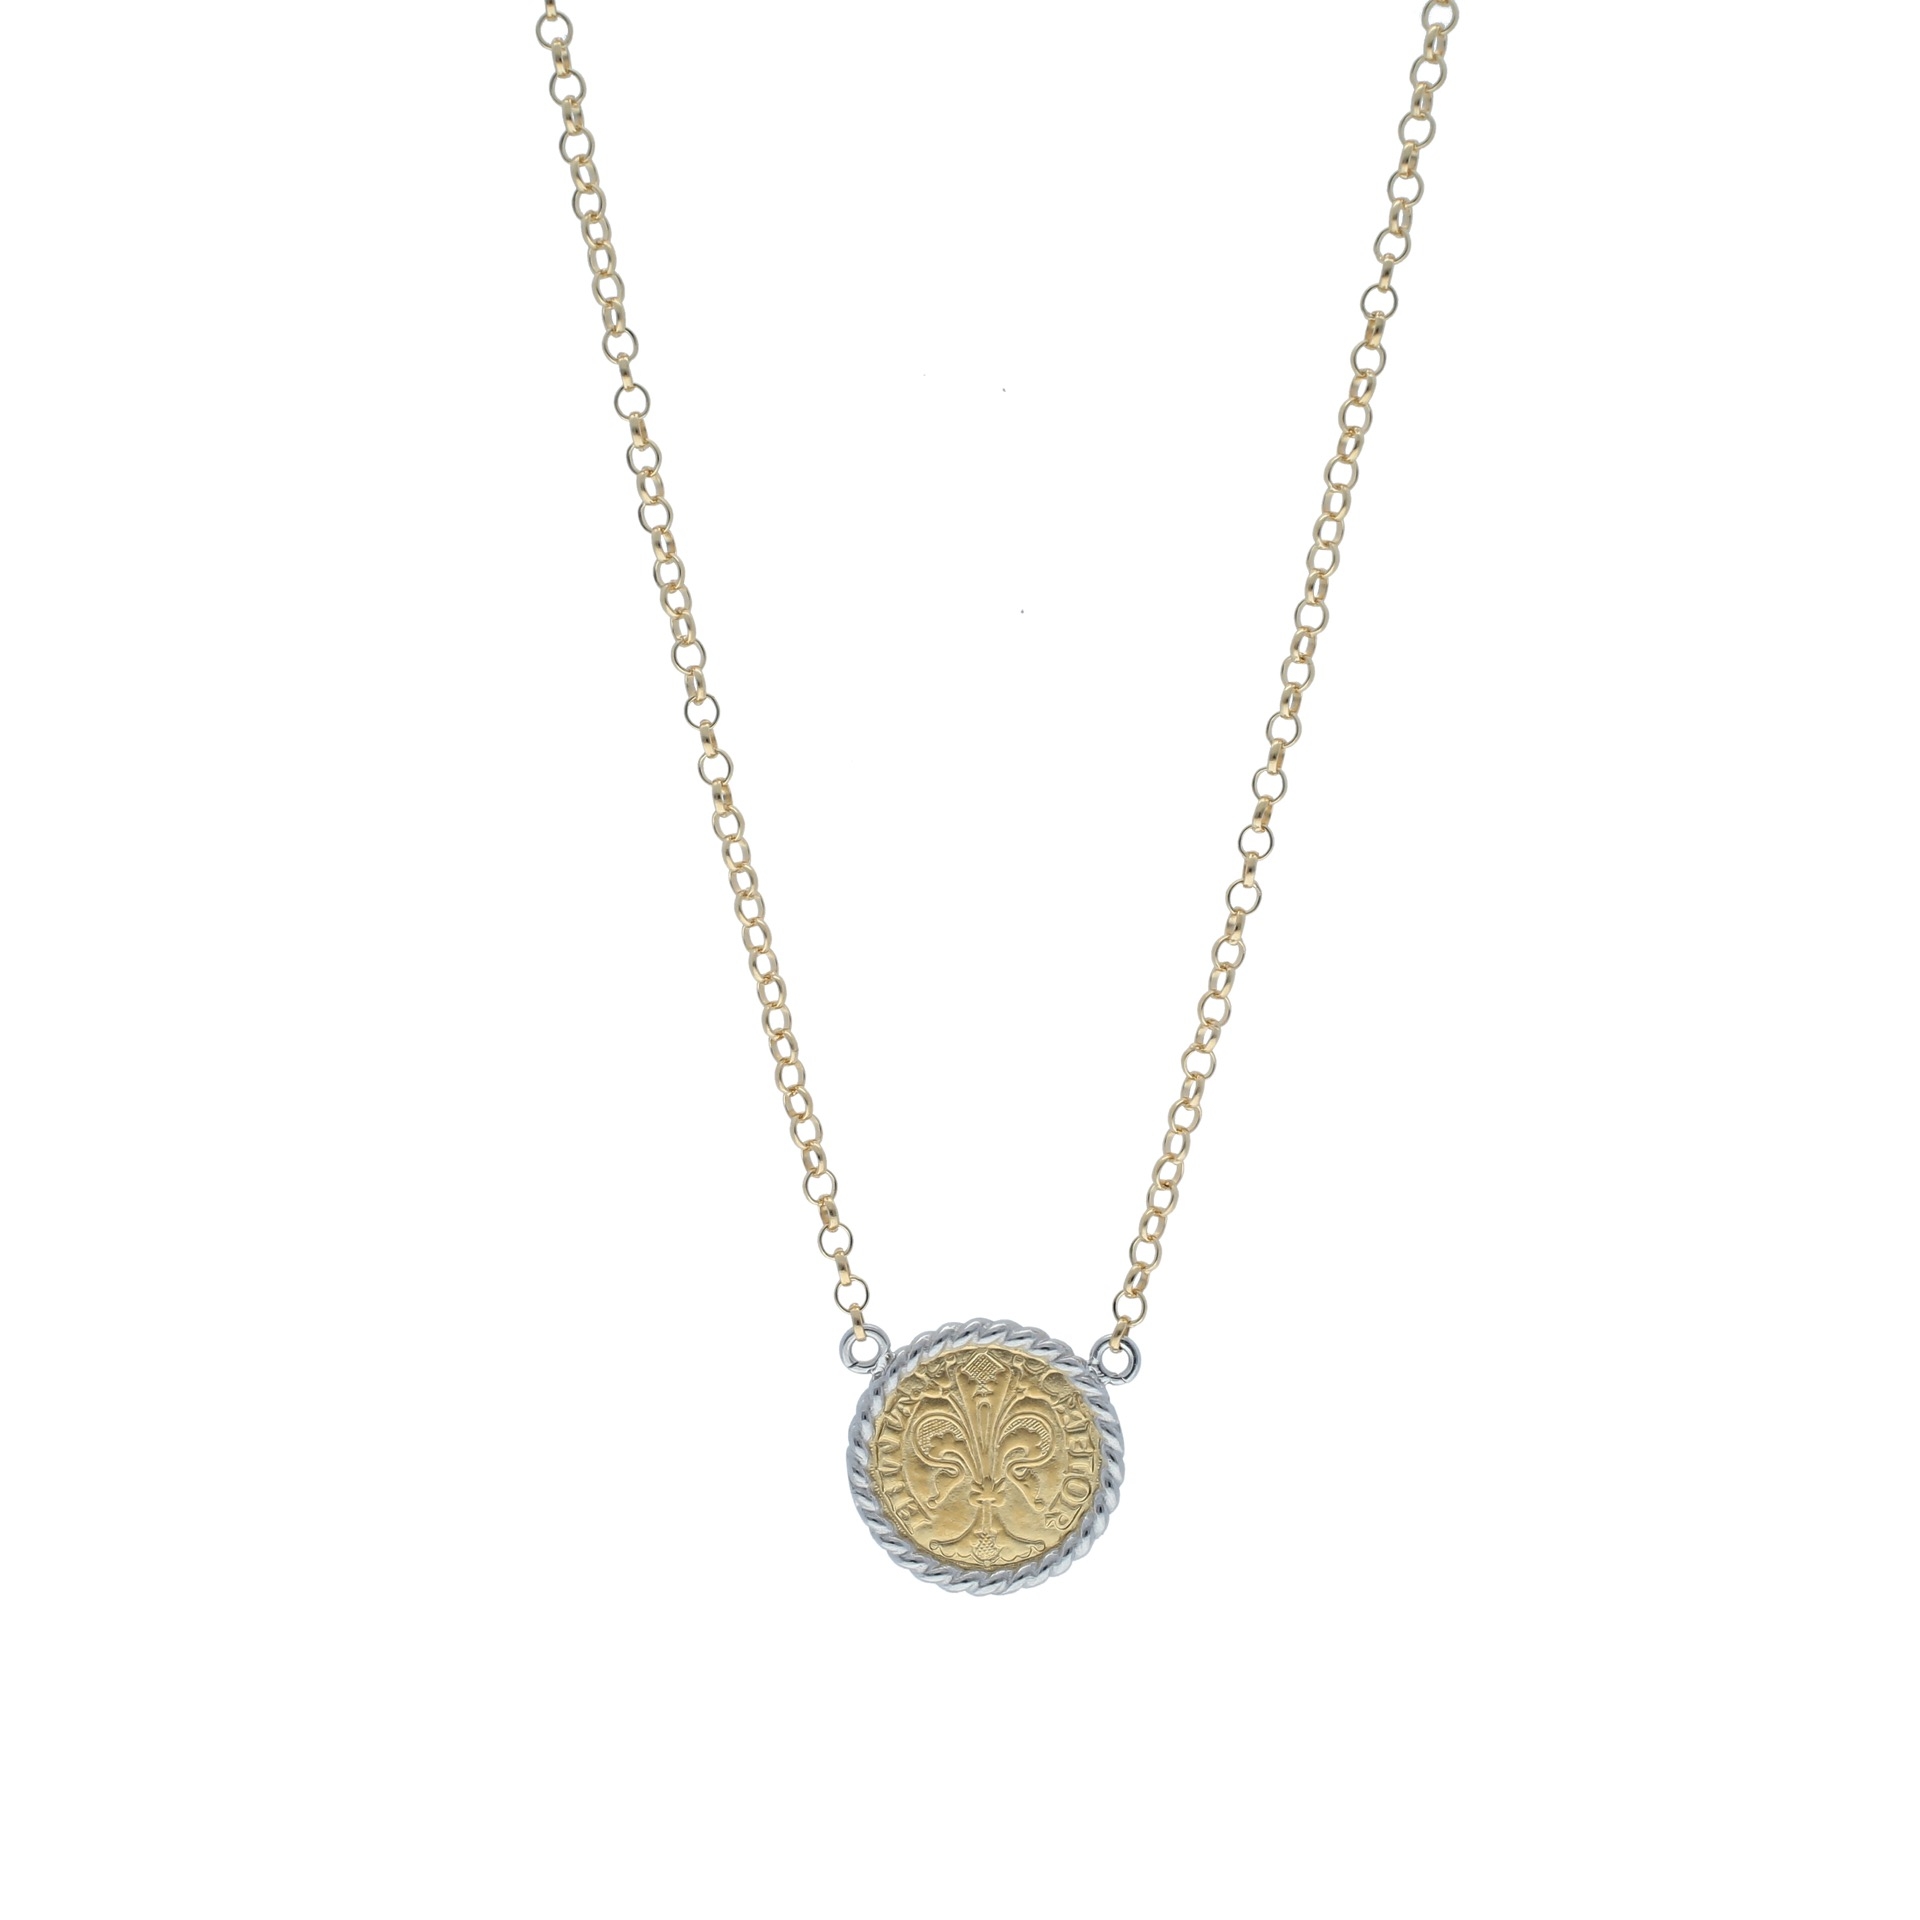 Chain link necklace Florentine coin fiorino in 18kt yellow and white gold